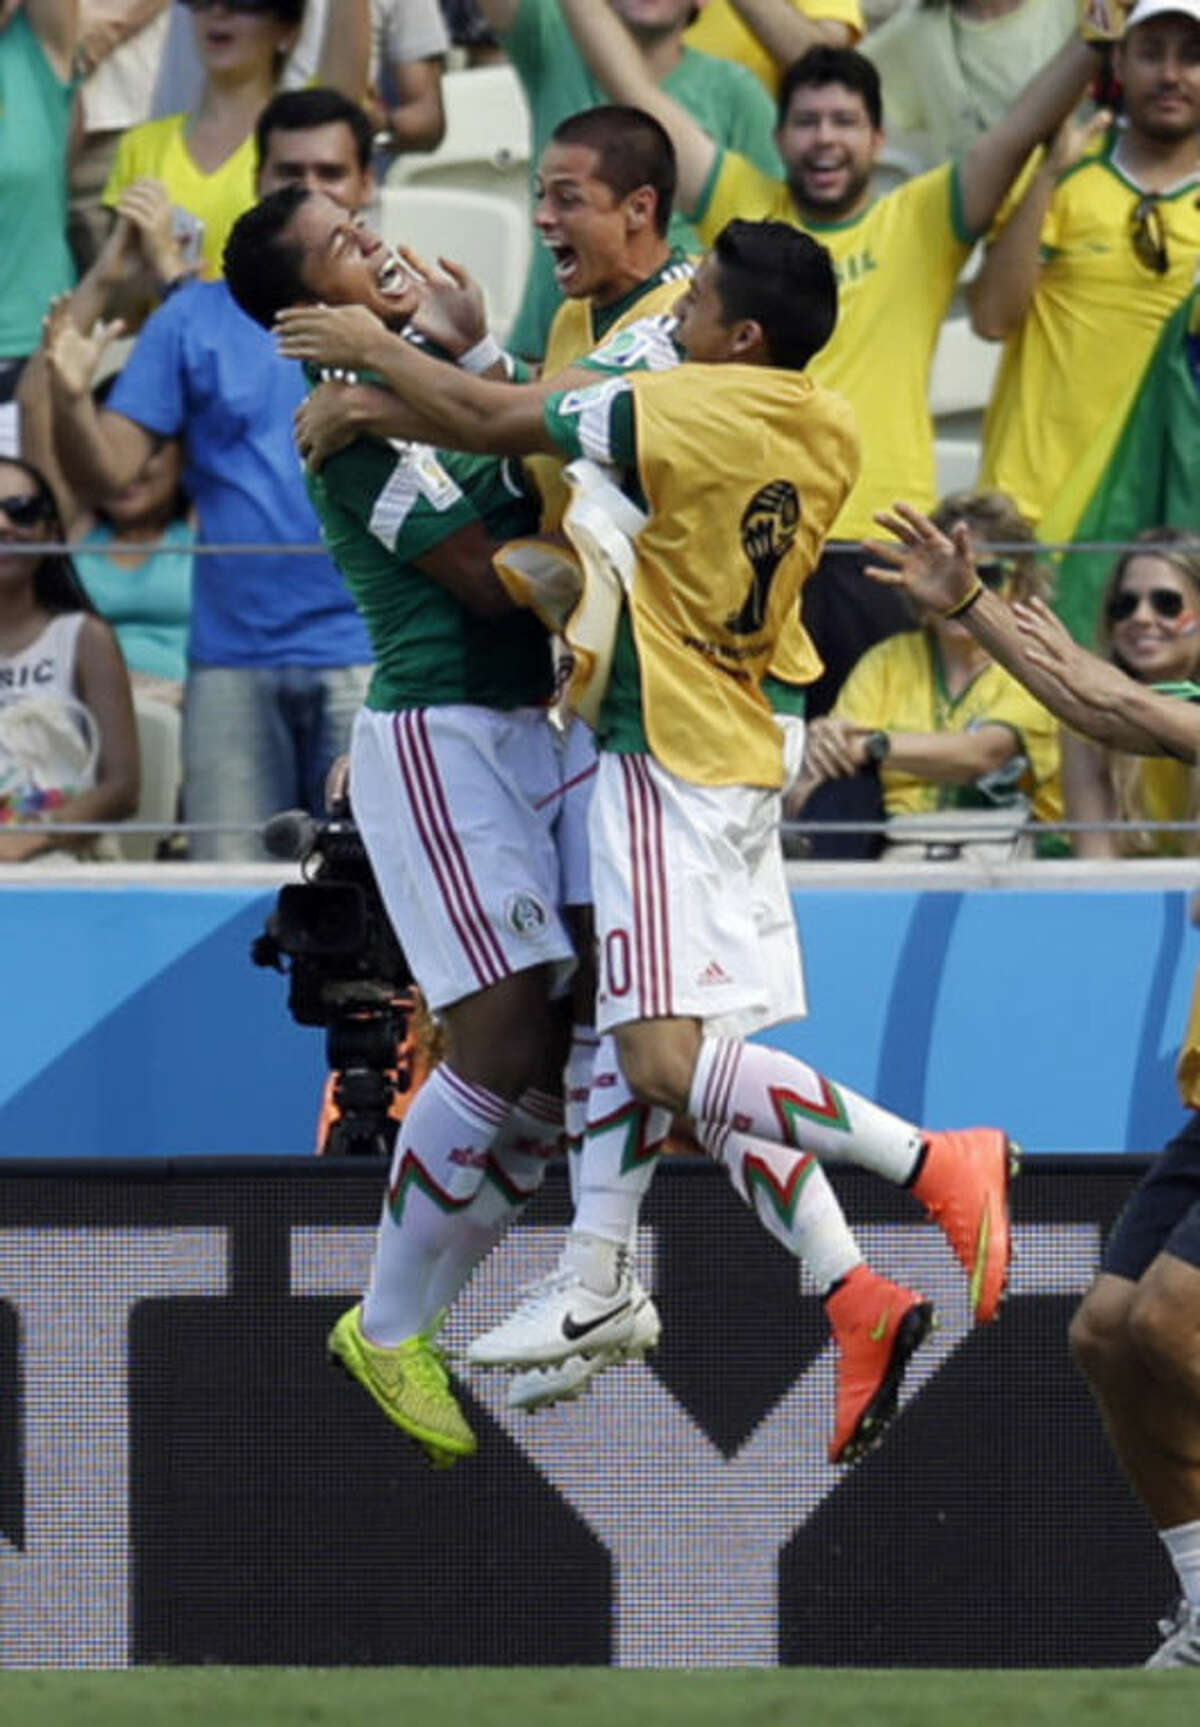 Mexico's Giovani dos Santos, left, celebrates after scoring the opening goal during the World Cup round of 16 soccer match between the Netherlands and Mexico at the Arena Castelao in Fortaleza, Brazil, Sunday, June 29, 2014. (AP Photo/Natacha Pisarenko)